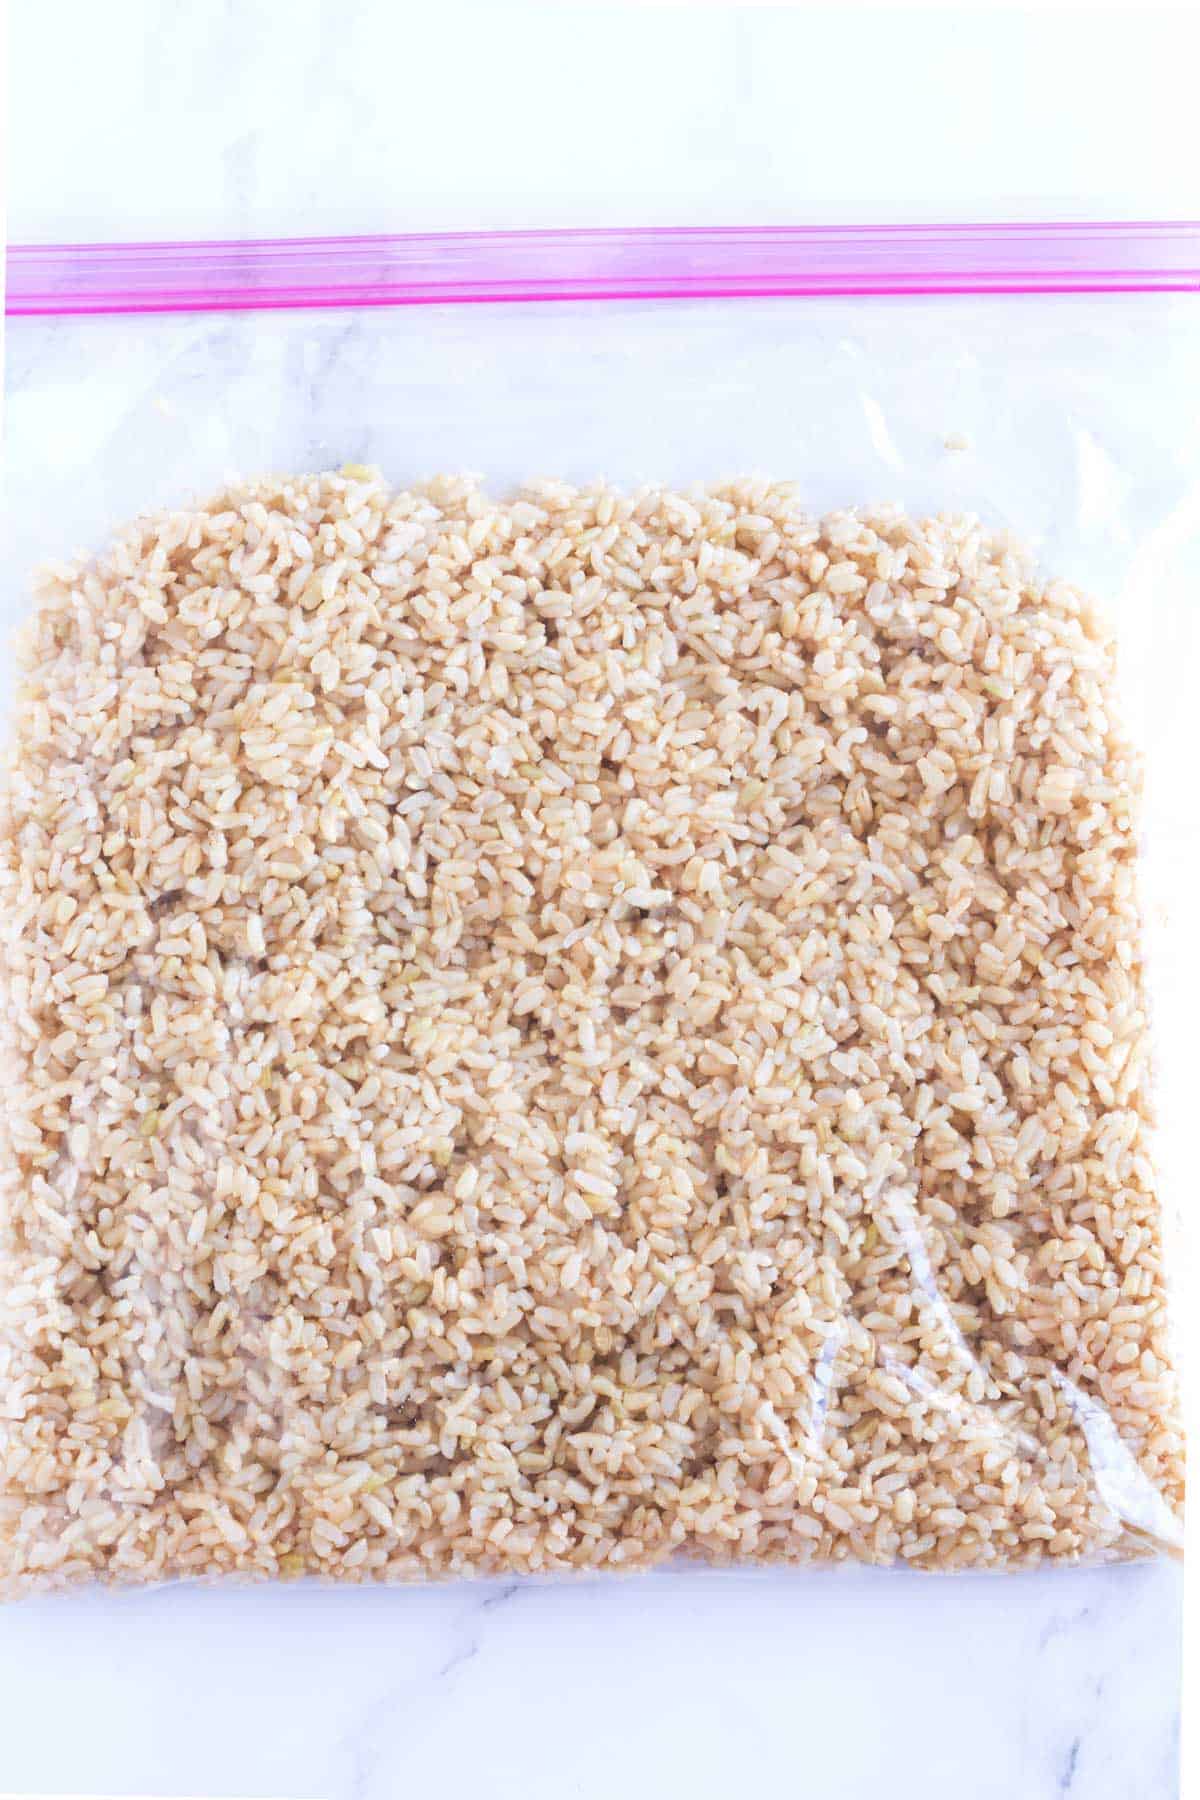 Zip bag full of rice ready to stack in freezer.